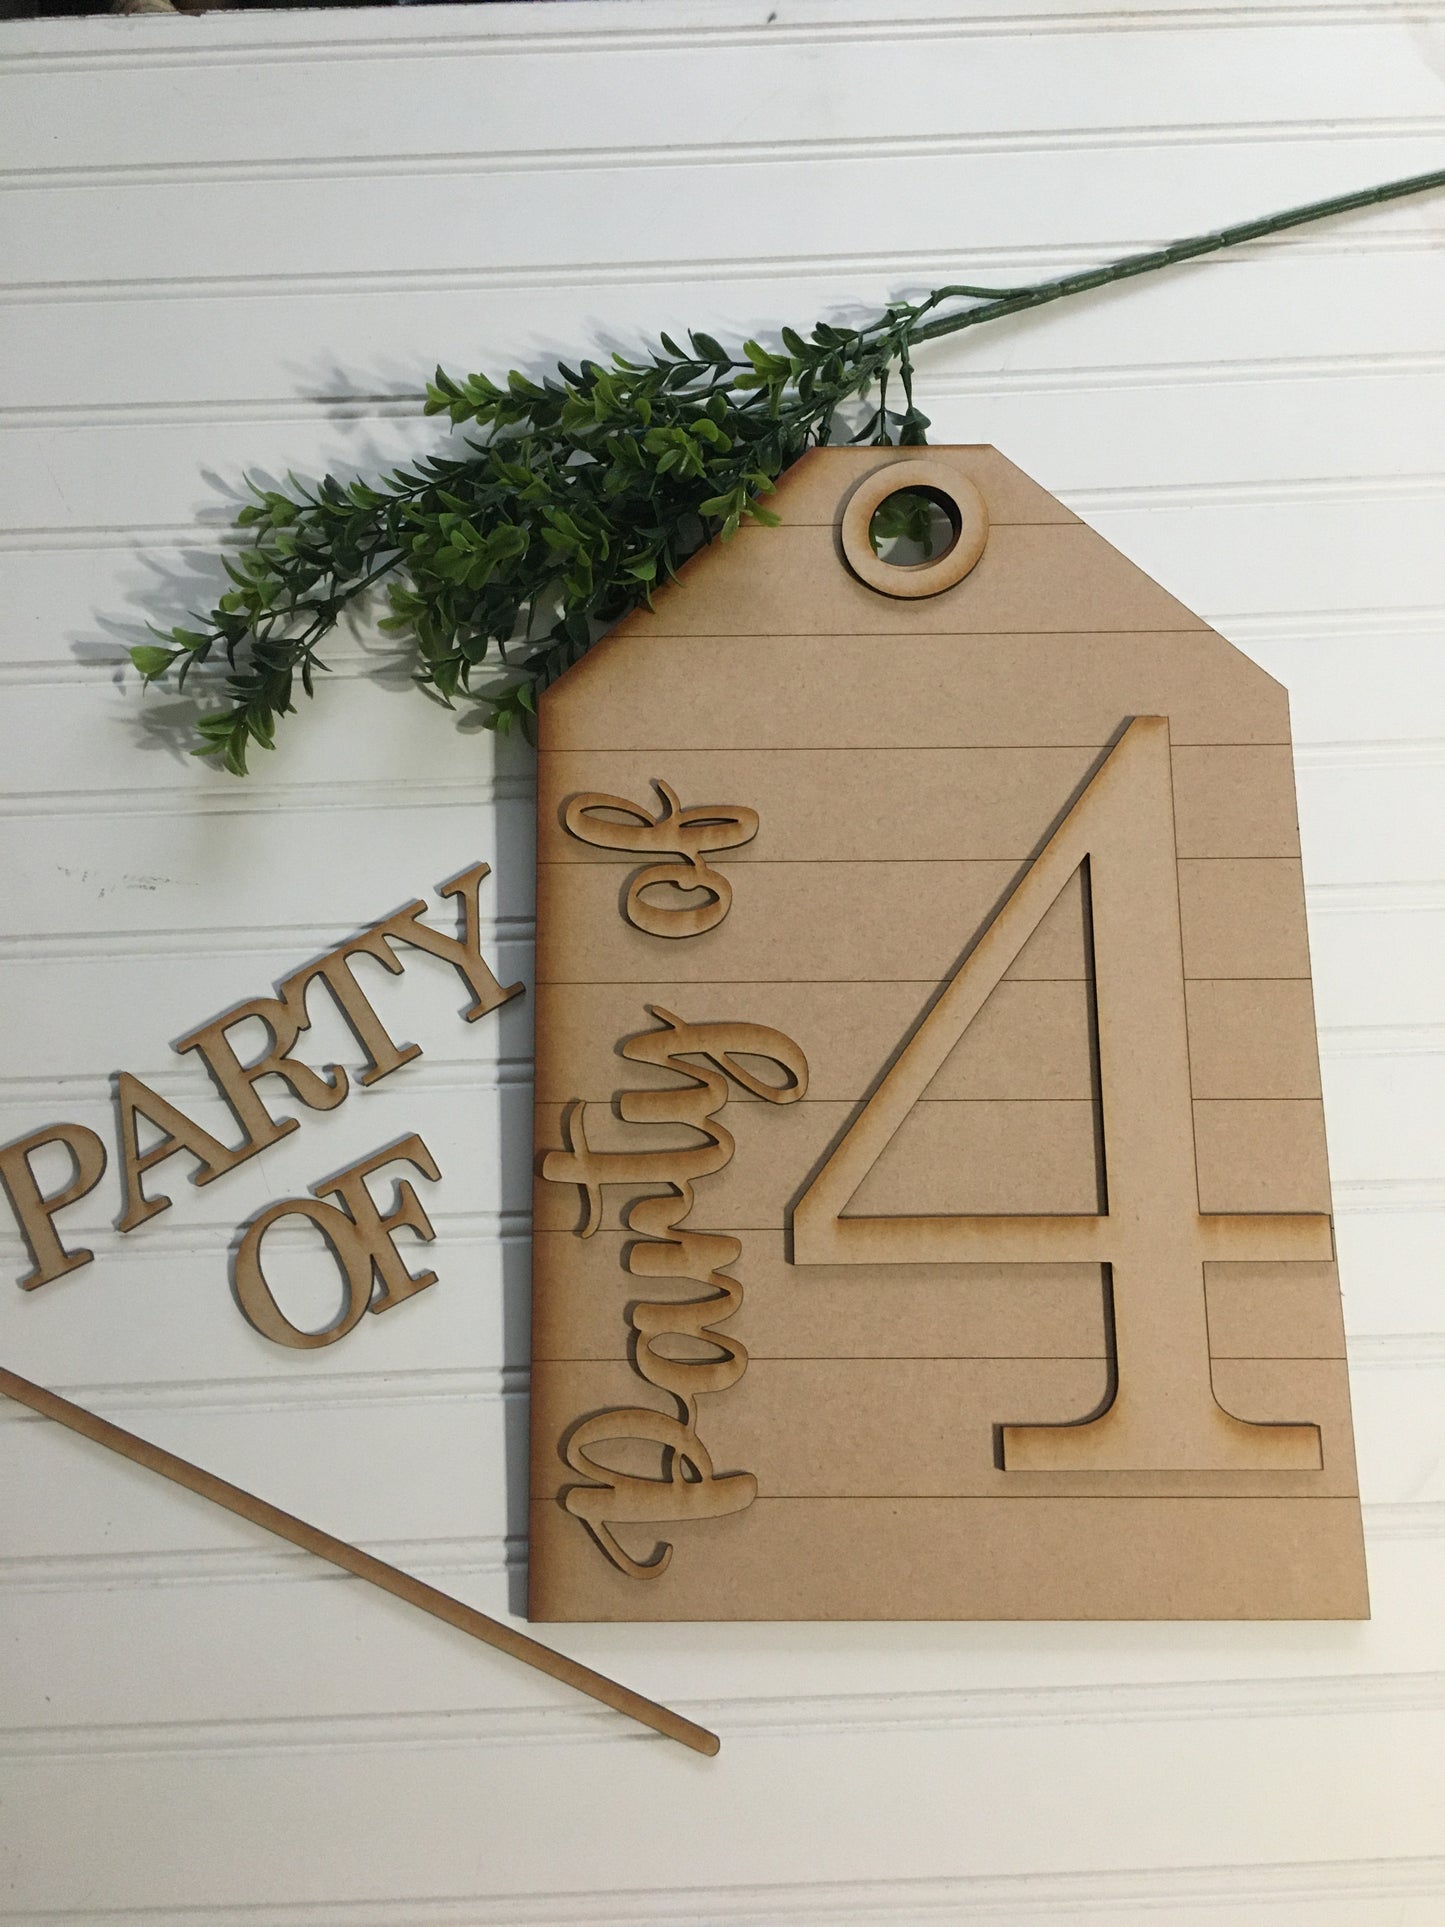 DIY Party of Large tag  - unfinished 2 styles